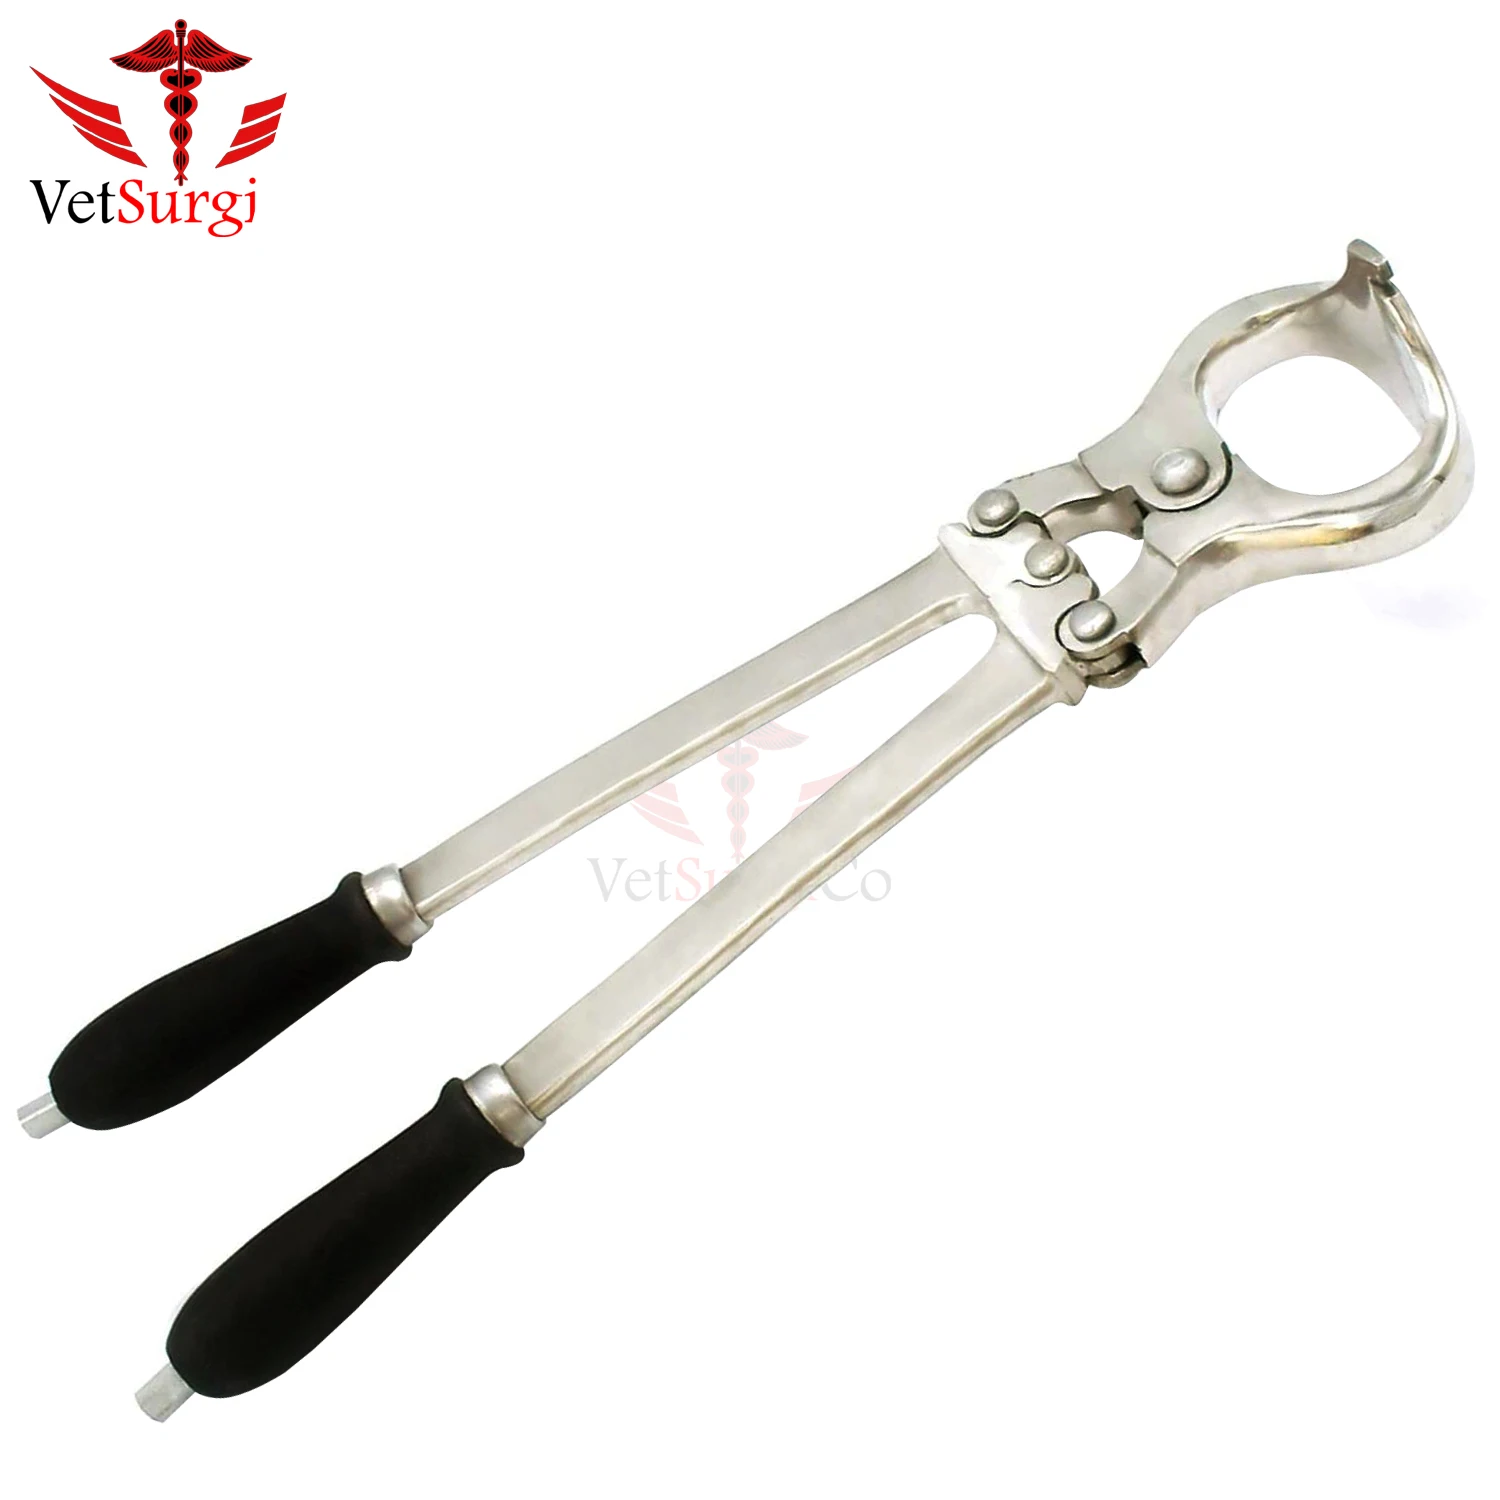 EMASCULATOR VETERINARY BLOODLESS CASTRATION BURDIZZO CASTRATOR AVAILABLE 5 SIZES 